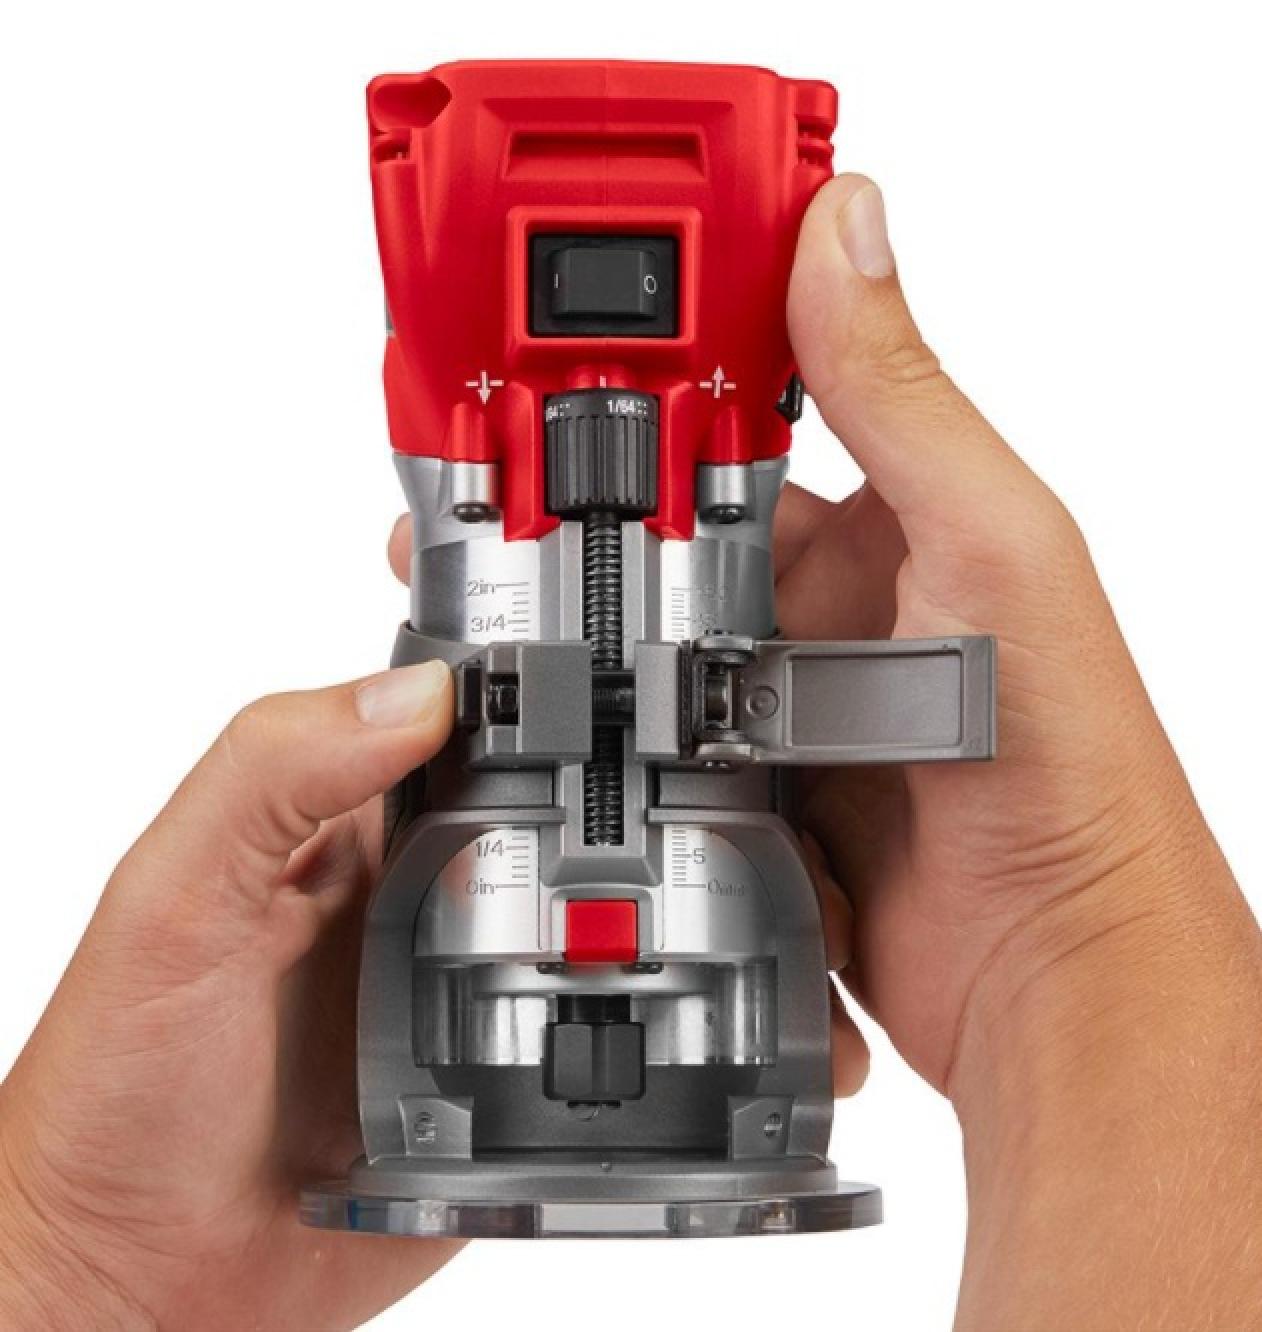 Milwaukee M18 FUEL 18-Volt Plunge Base Lithium-Ion Brushless Cordless Compact Router (Tool-Only)